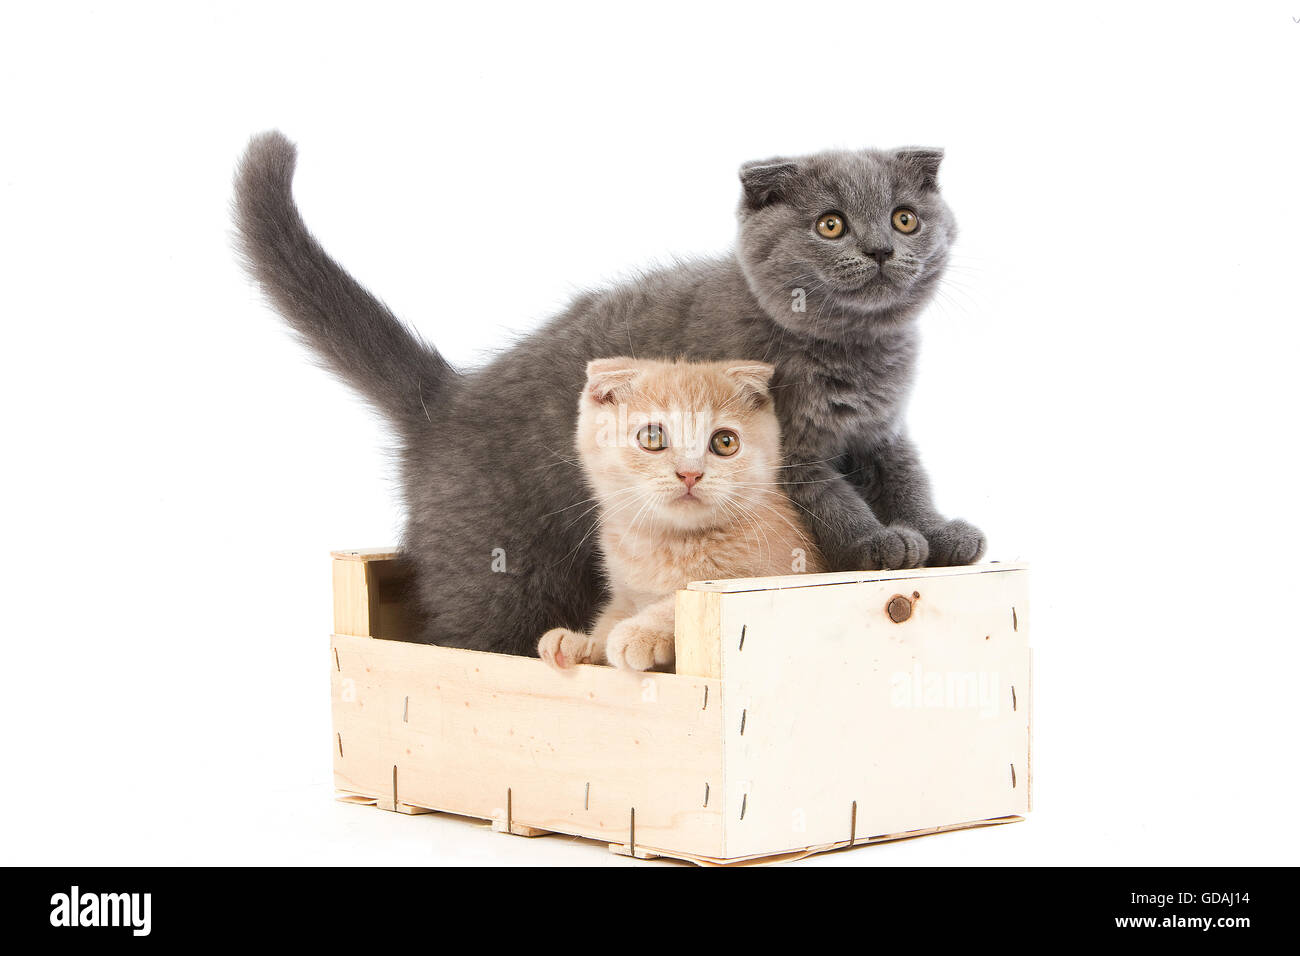 2 MONTHS OLD SCOTTISH FOLD CREAM AND BLUE KITTENS Stock Photo